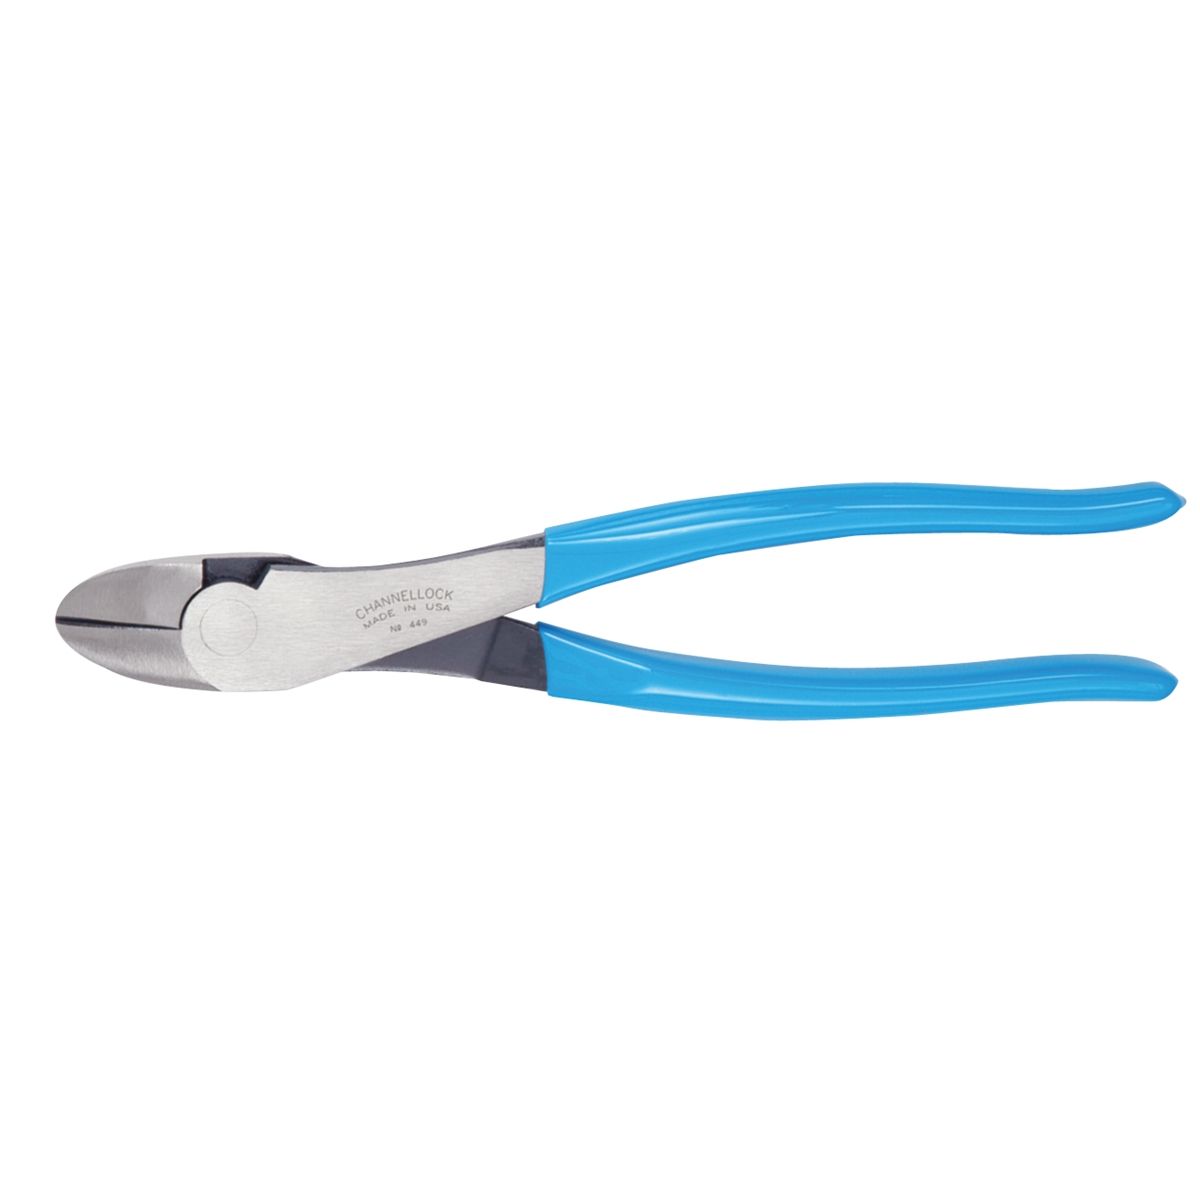 449 9.5-INCH HIGH LEVERAGE CURVED DIAGONAL CUTTING PLIERS